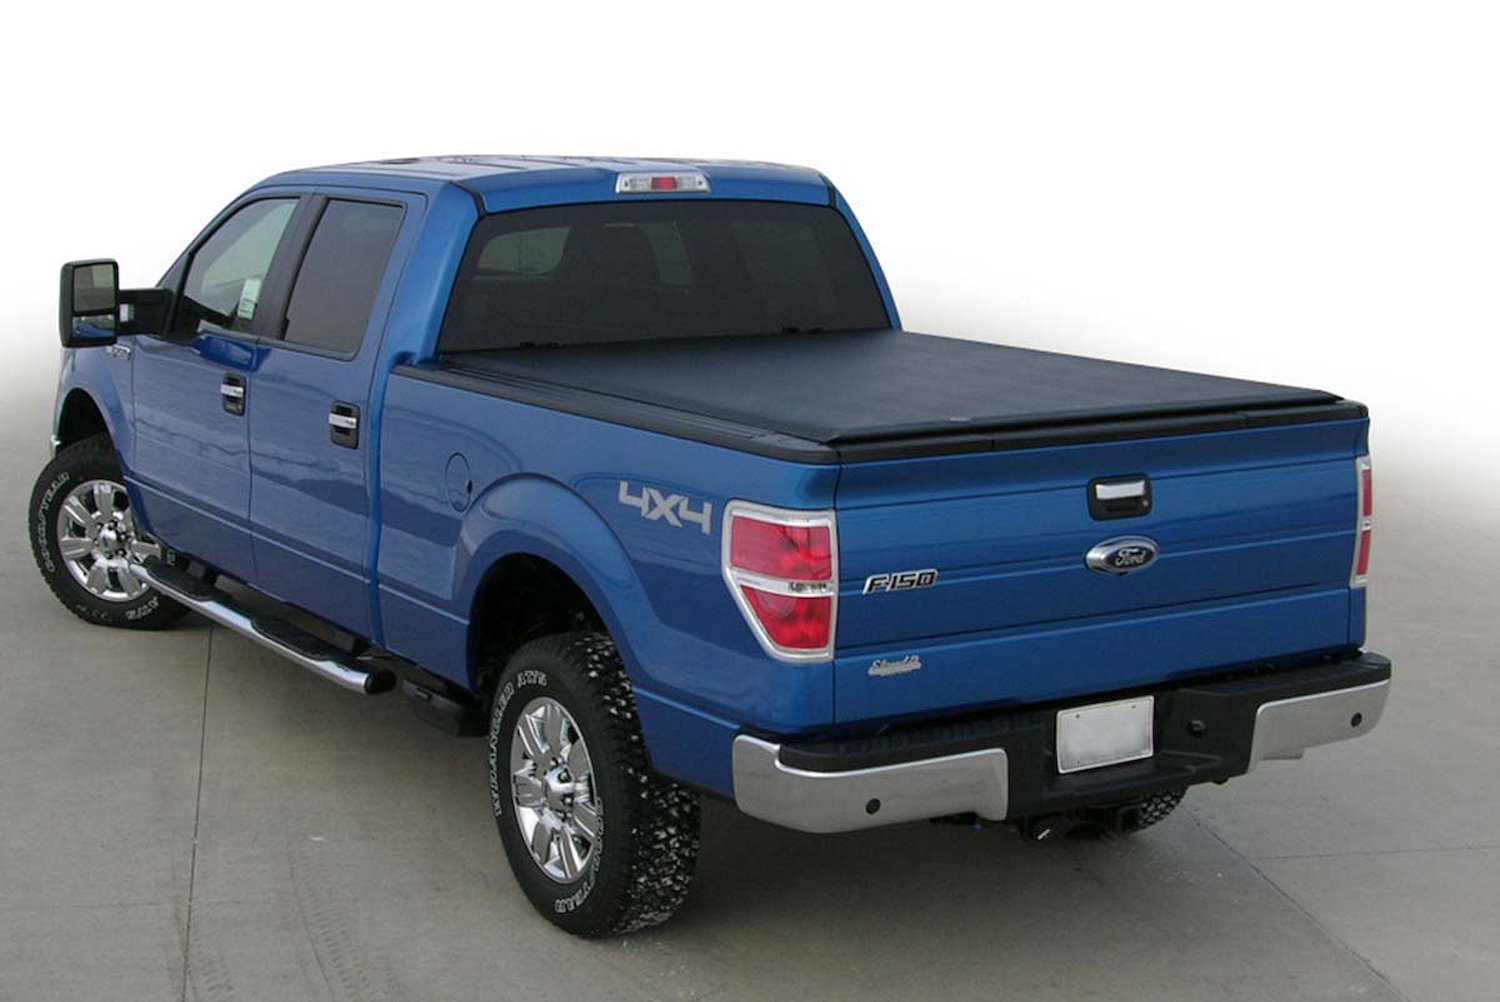 LORADO Roll-Up Tonneau Cover, Fits Select Ford F-150, with 6 ft. 6 in. Bed